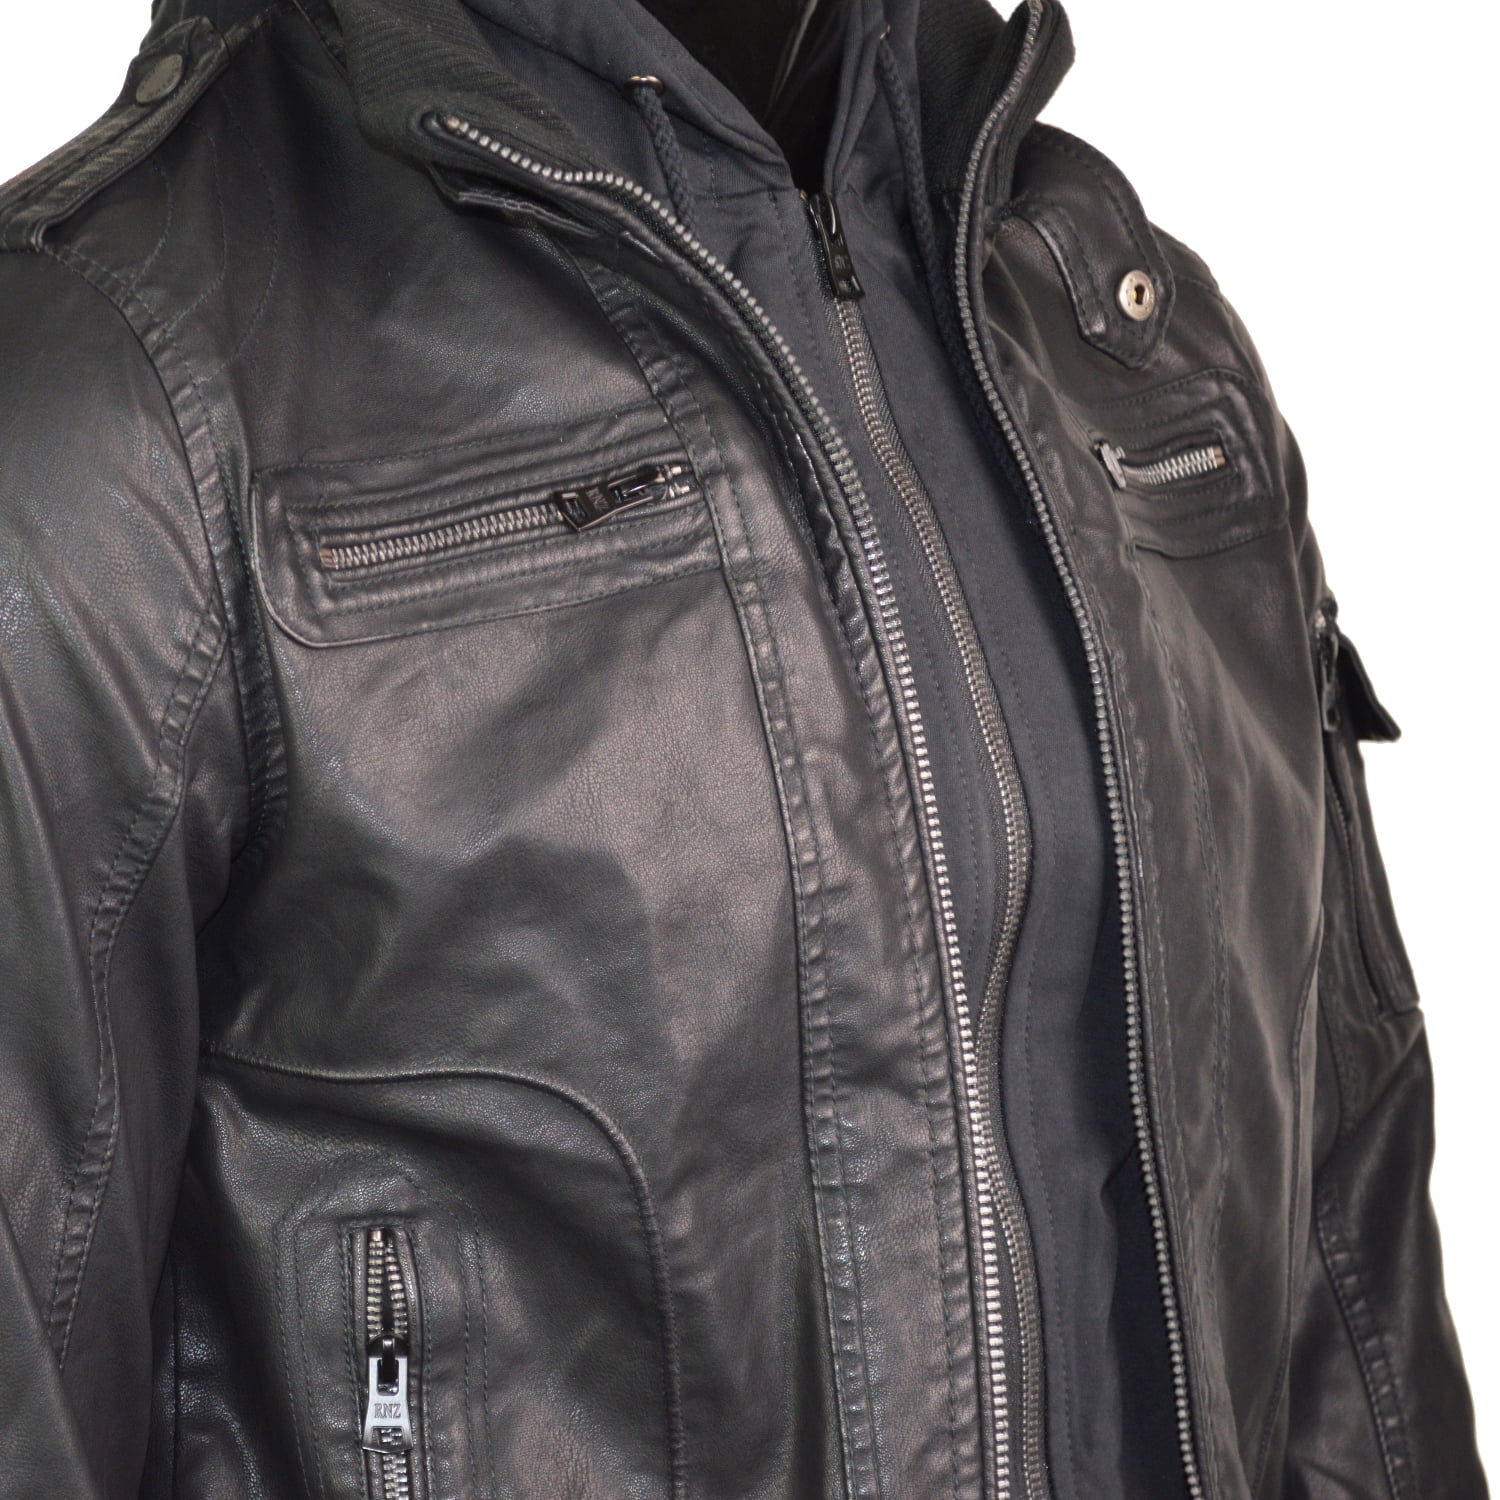 MANSDOUR Men's Faux Leather Jacket Warm Black Motorcycle Bomber Jacket with  Removable Hood